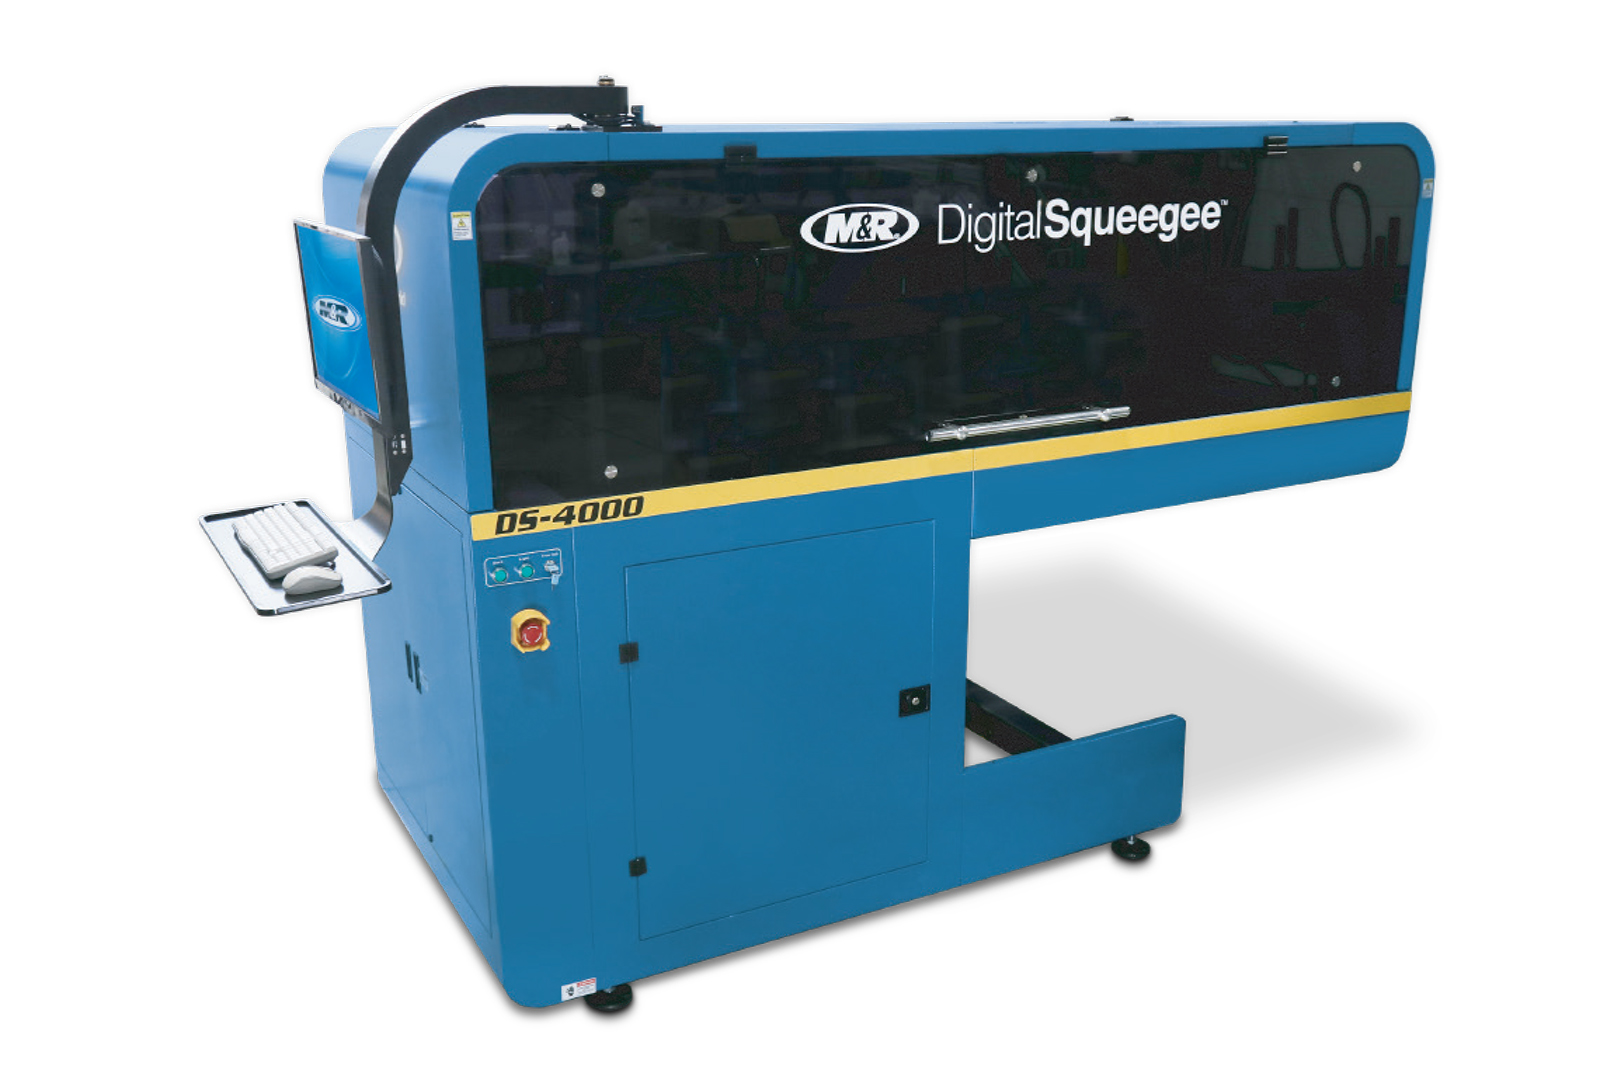 Nazdar SourceOne M&R DS-4000 Digital Squeegee Hybrid Printing System, Nazdar SourceOne